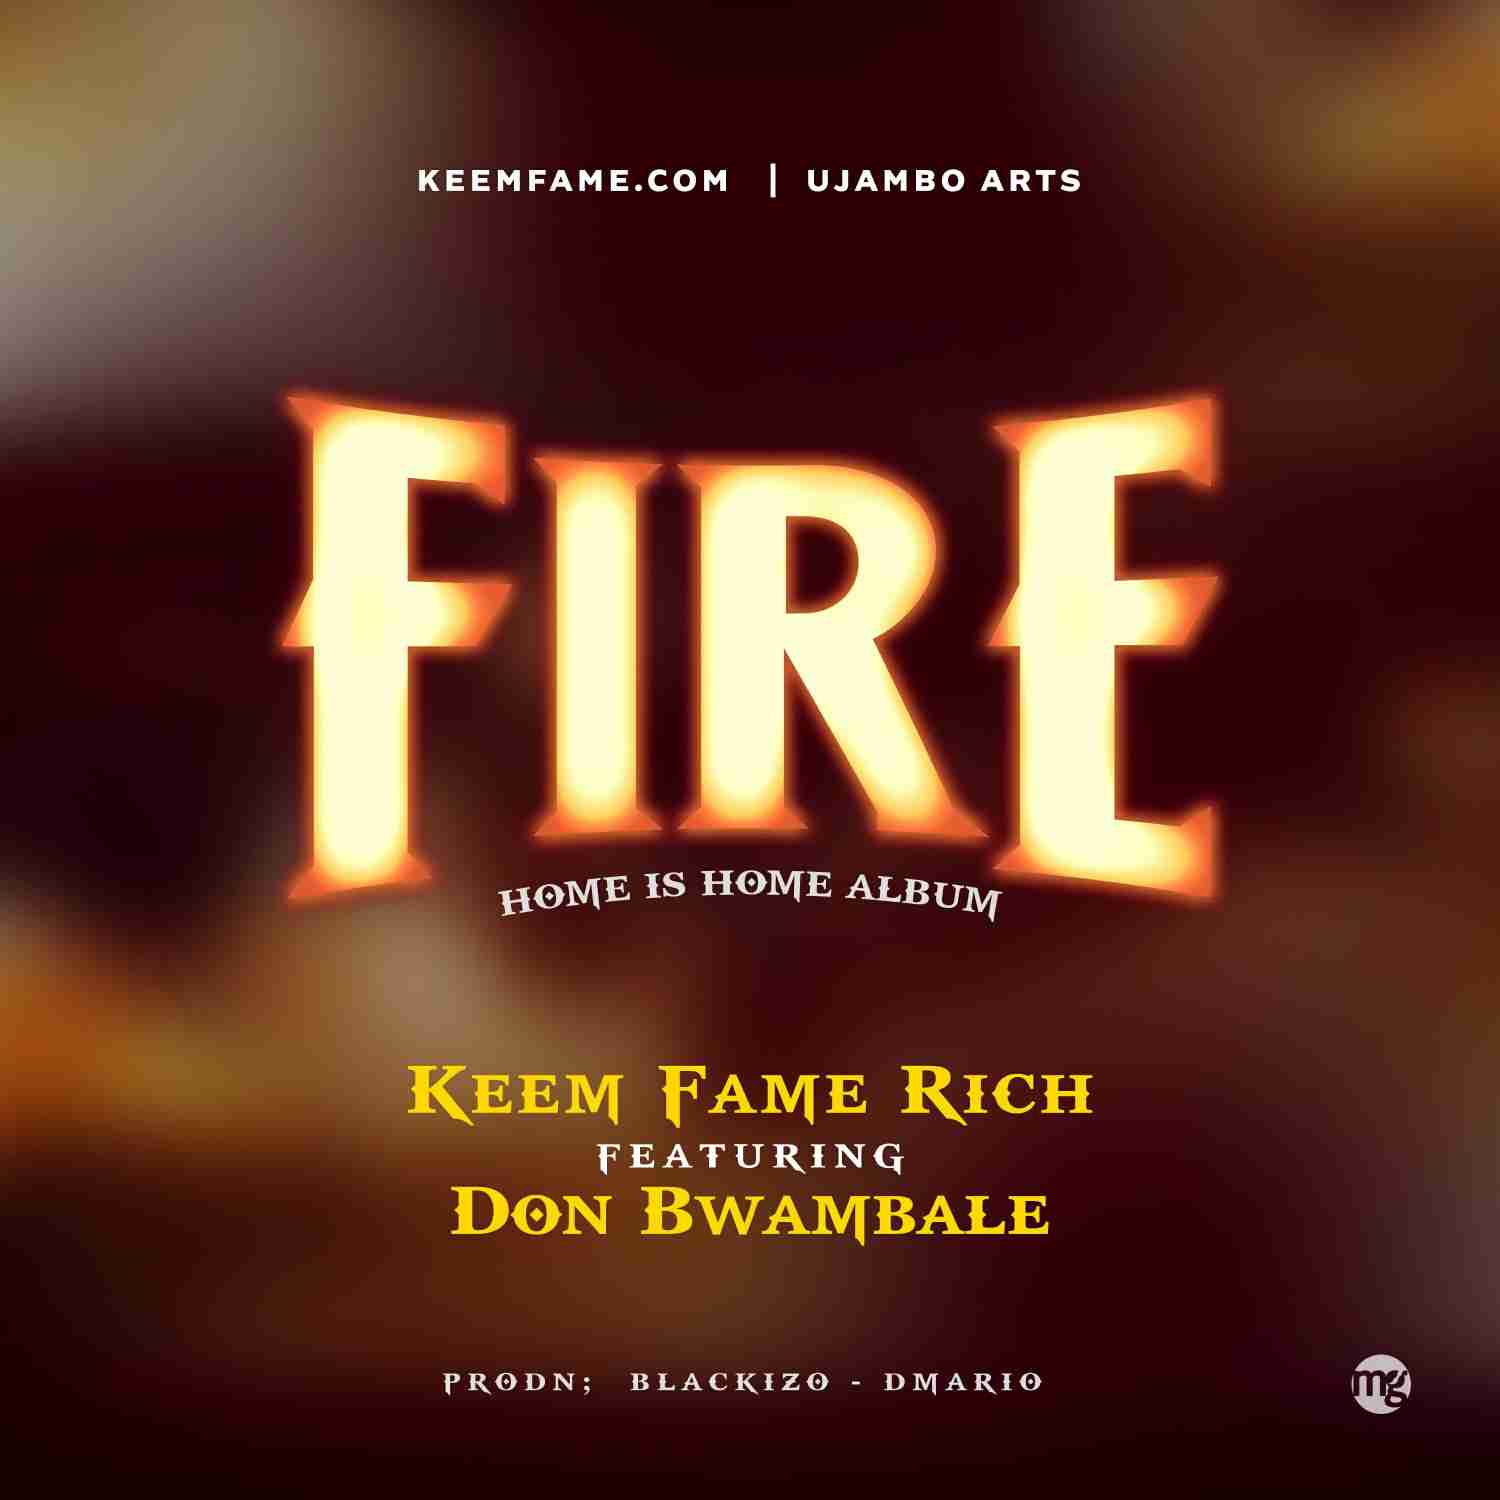 Fire by Keem Fame Rich Ft Don Bwambale